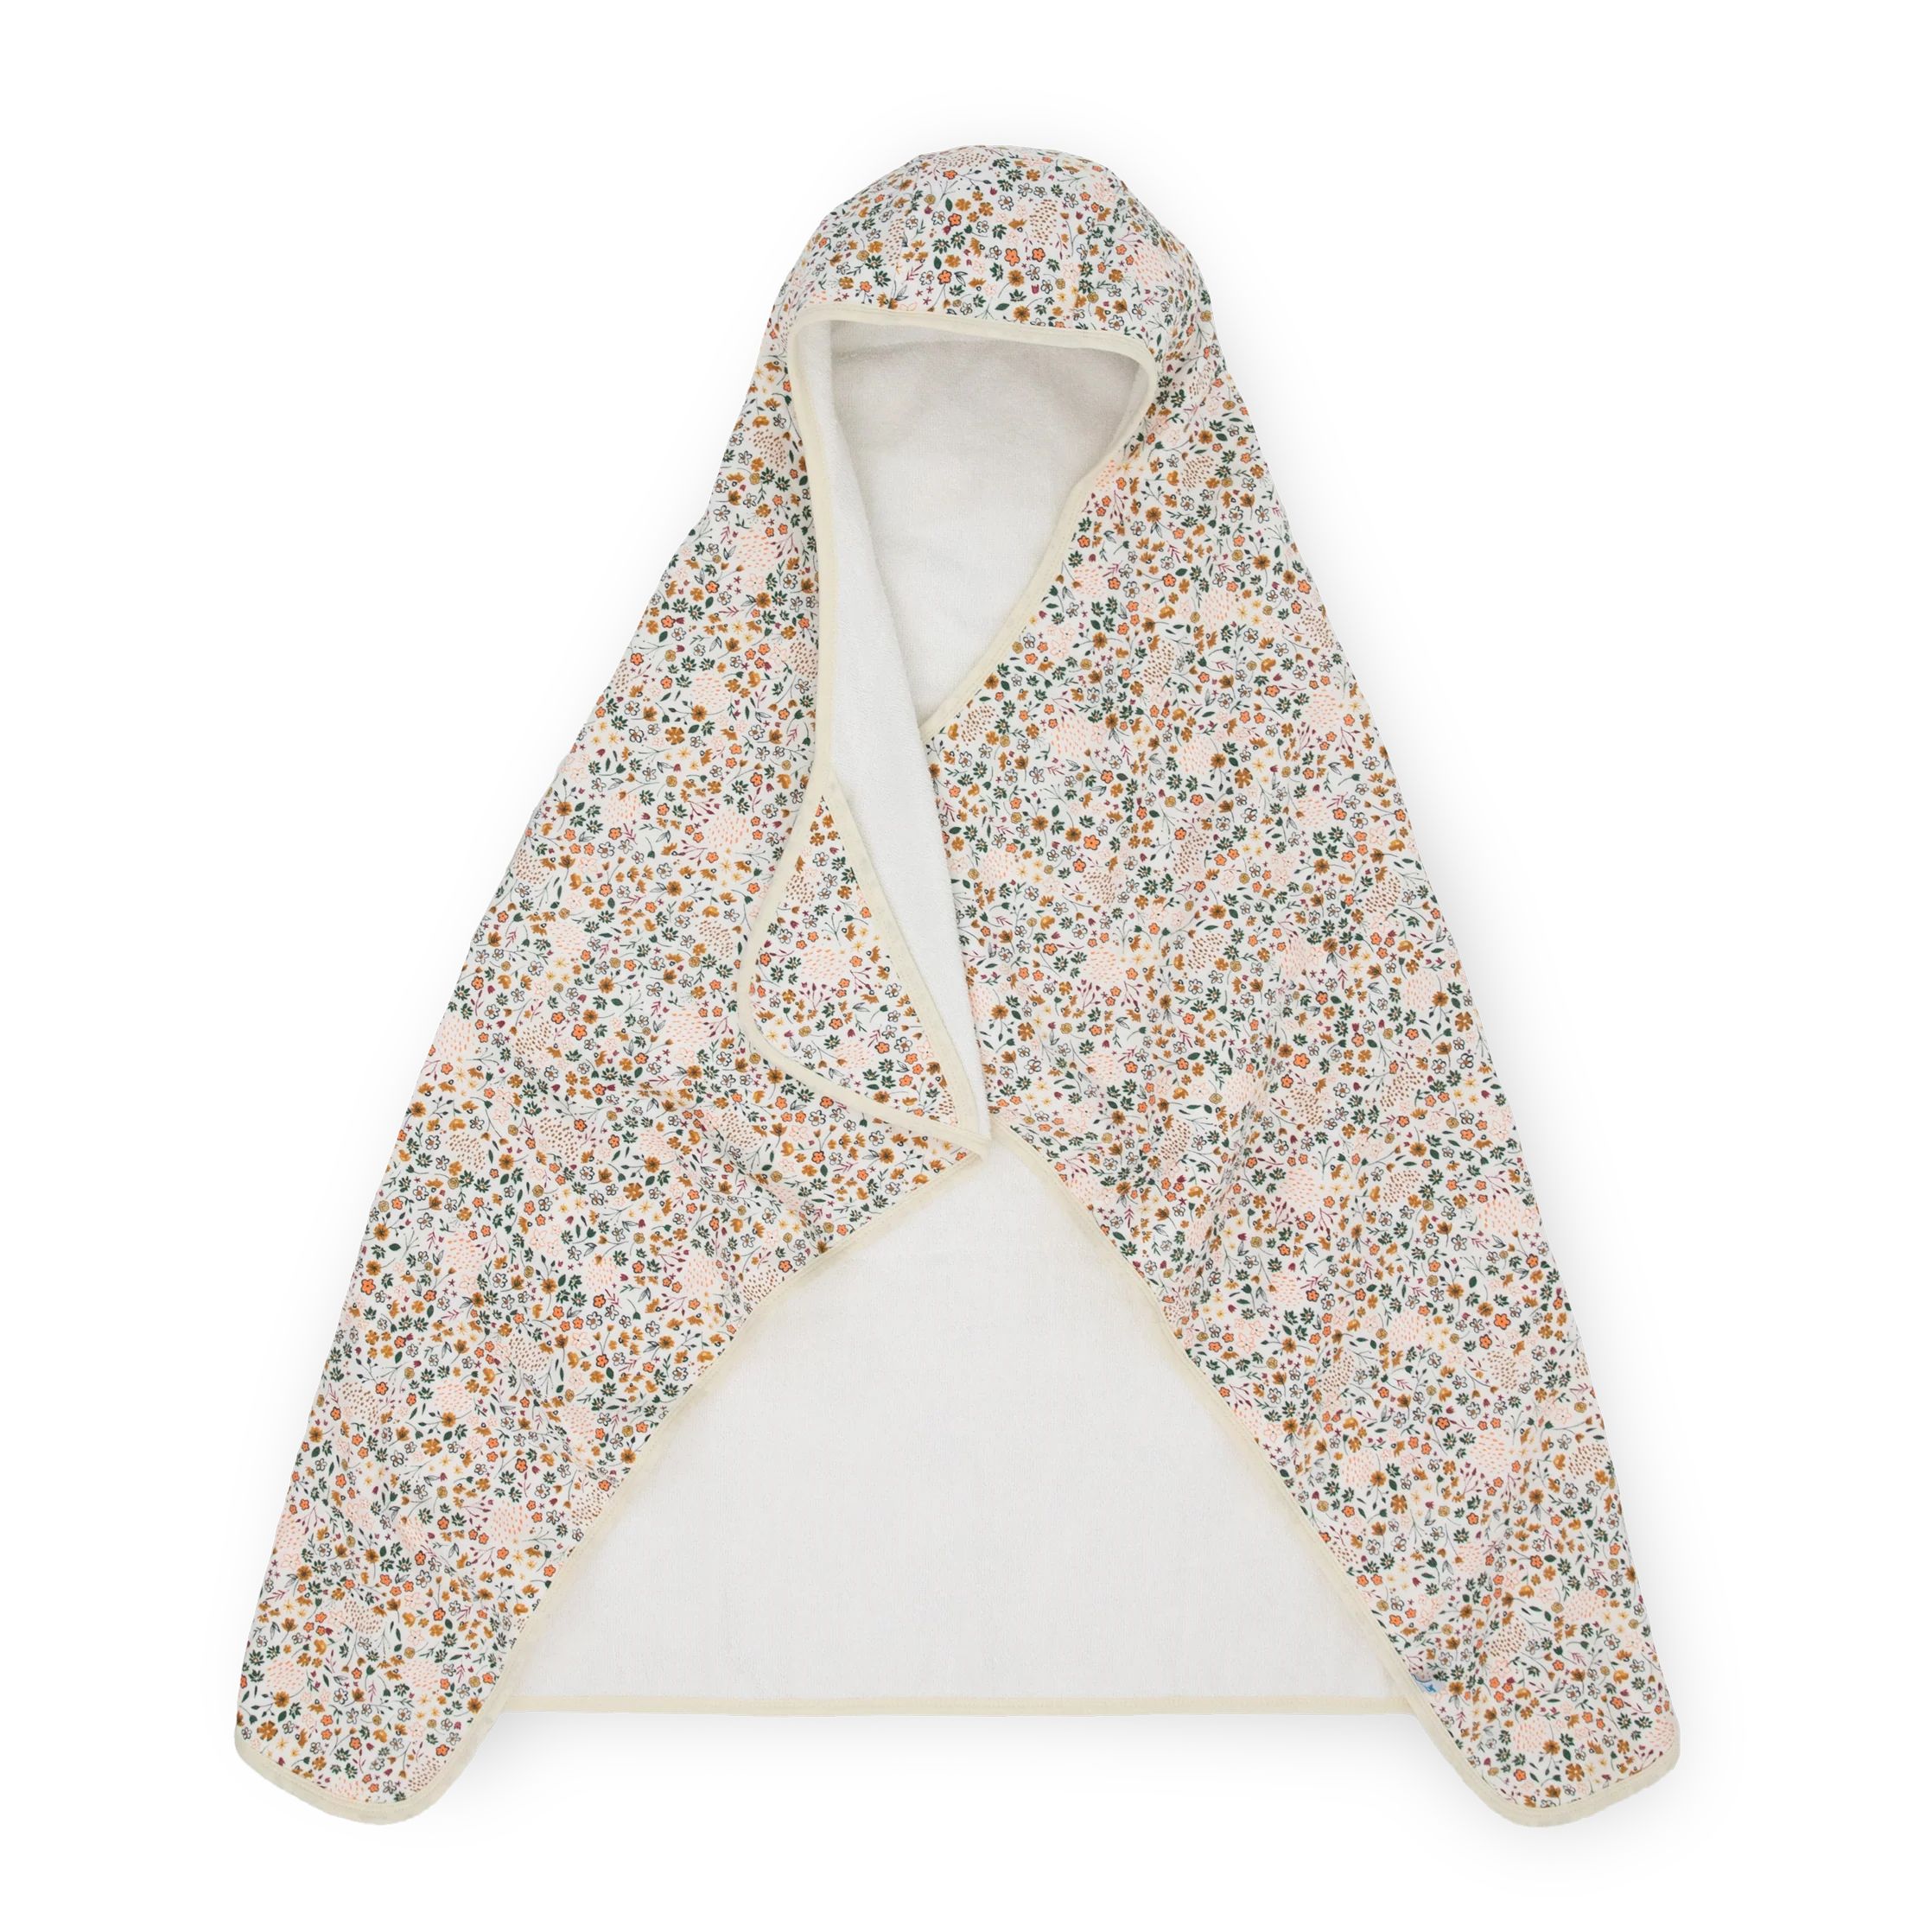 Toddler Hooded Towel - Pressed Petals | Little Unicorn